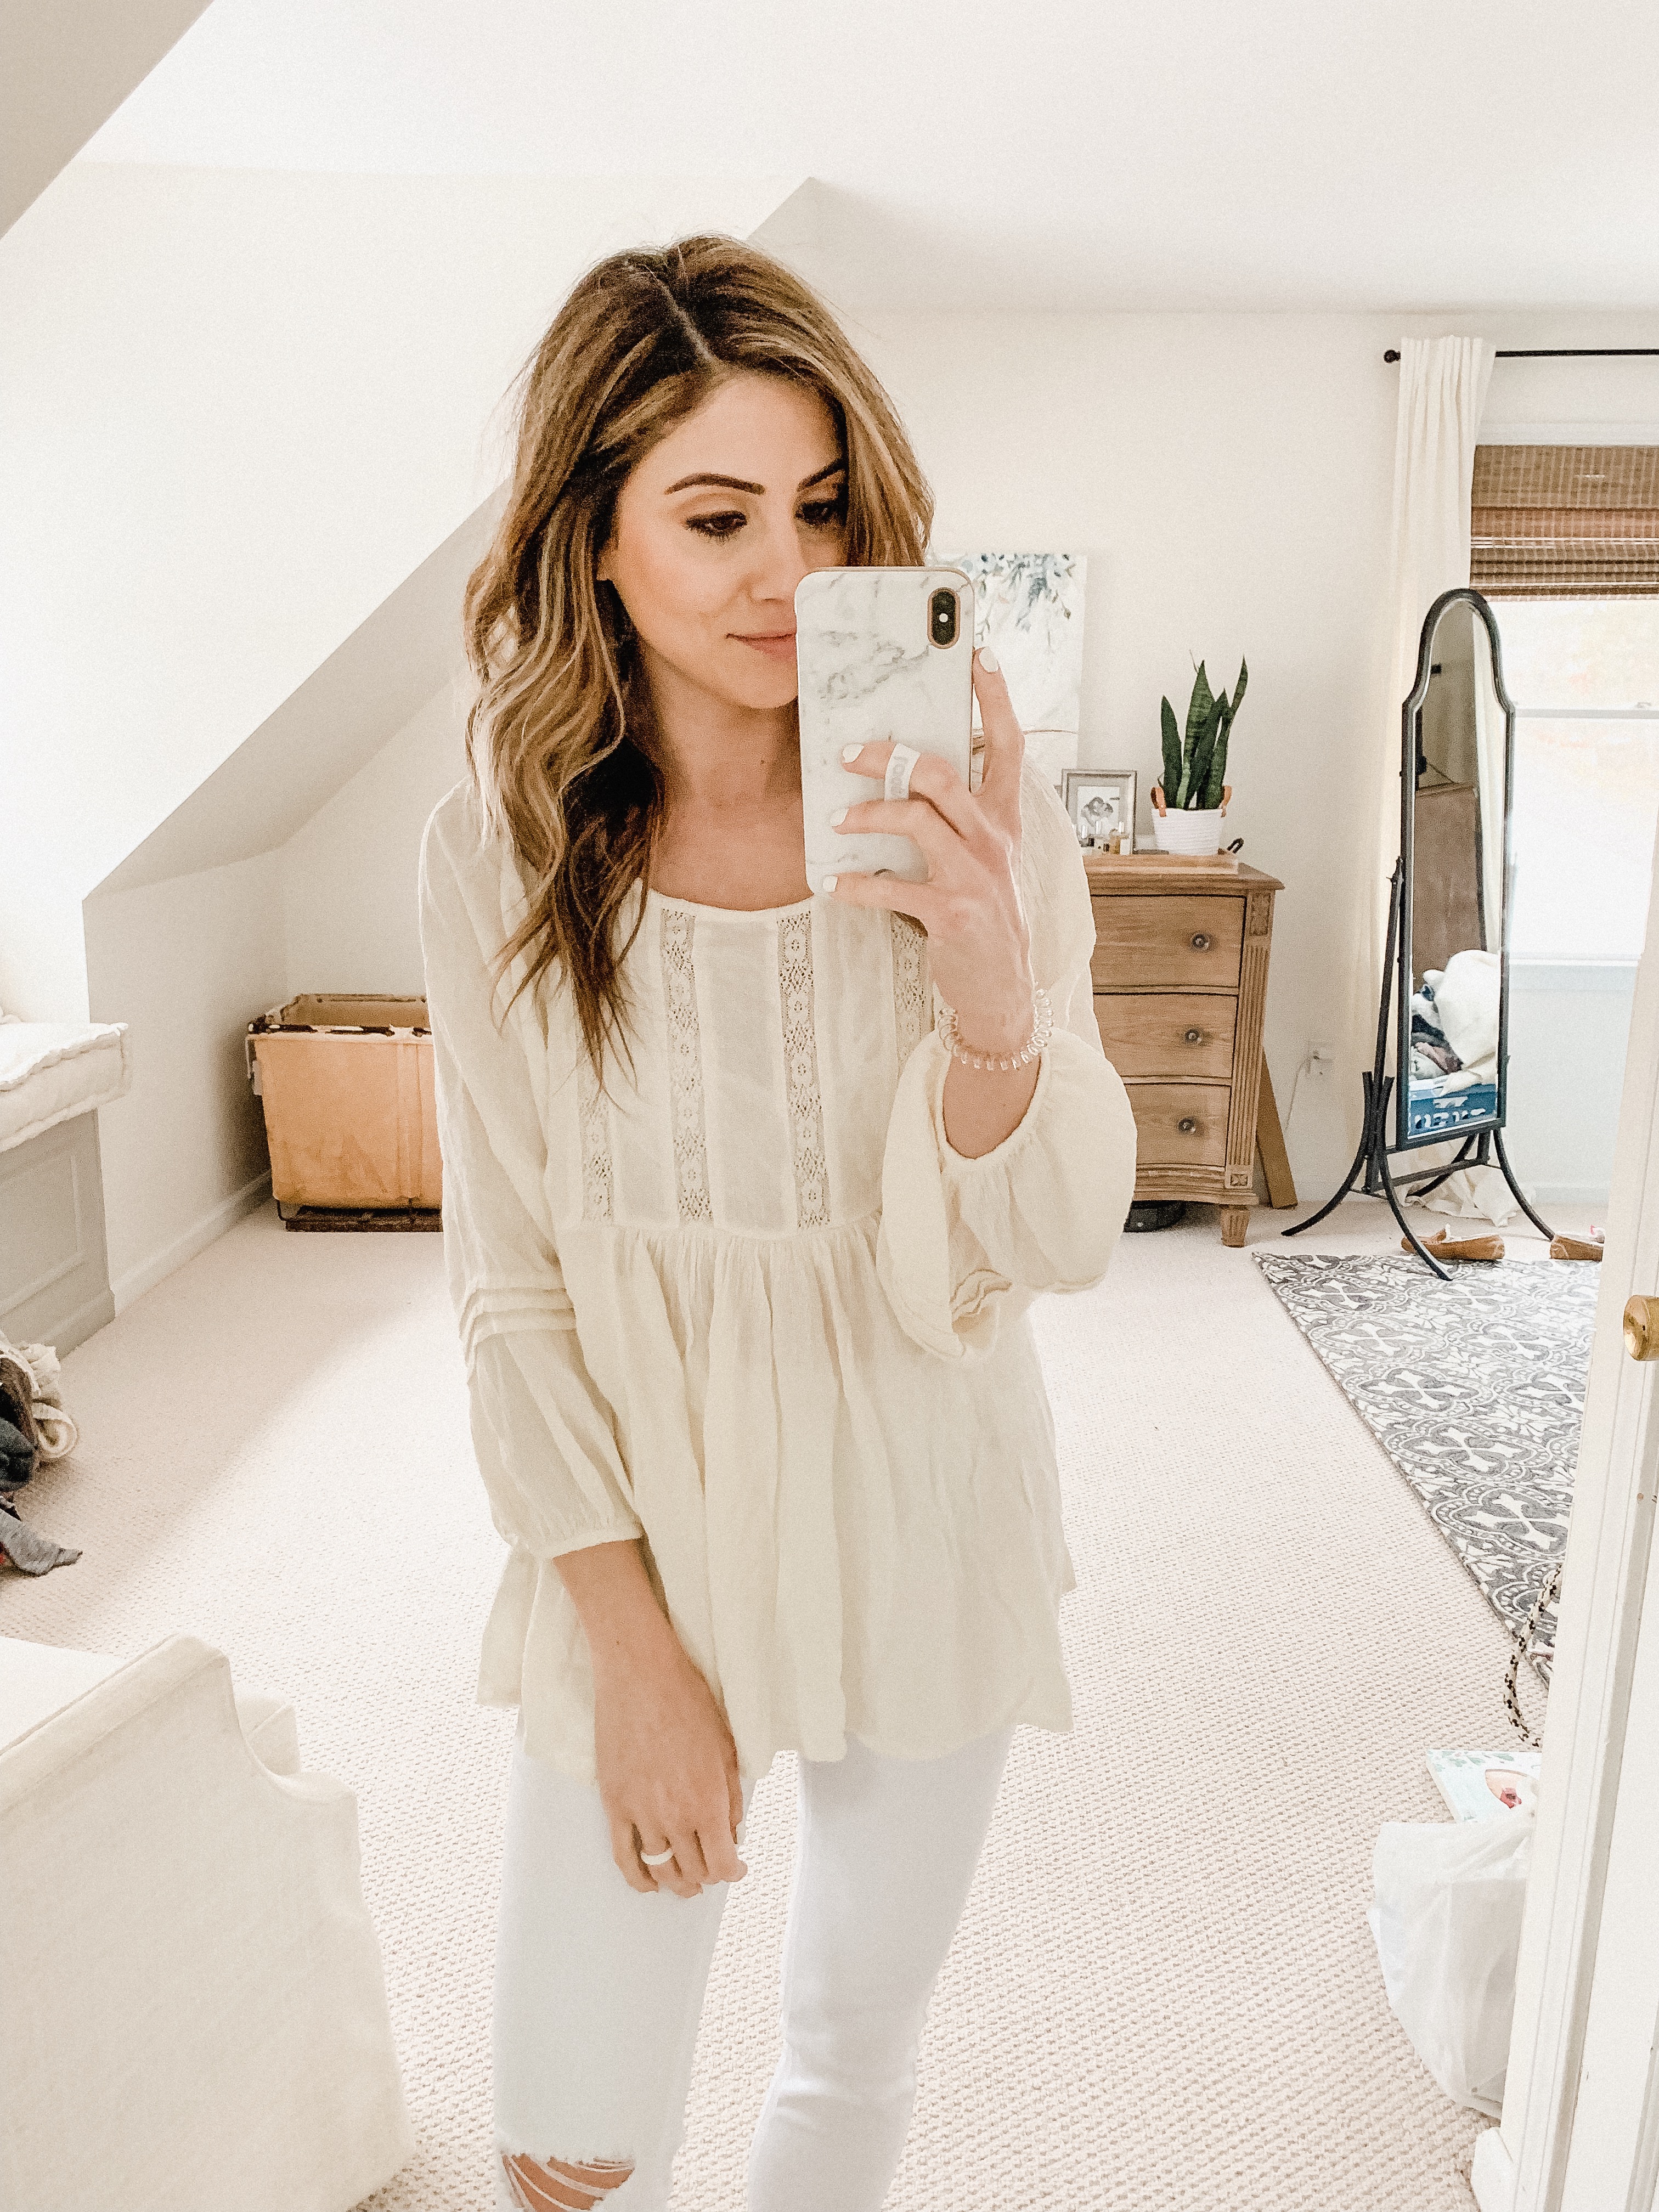 Connecticut life and style blogger Lauren McBride shares Nursing Friendly Tops for spring including a variety of button down and tunic options.